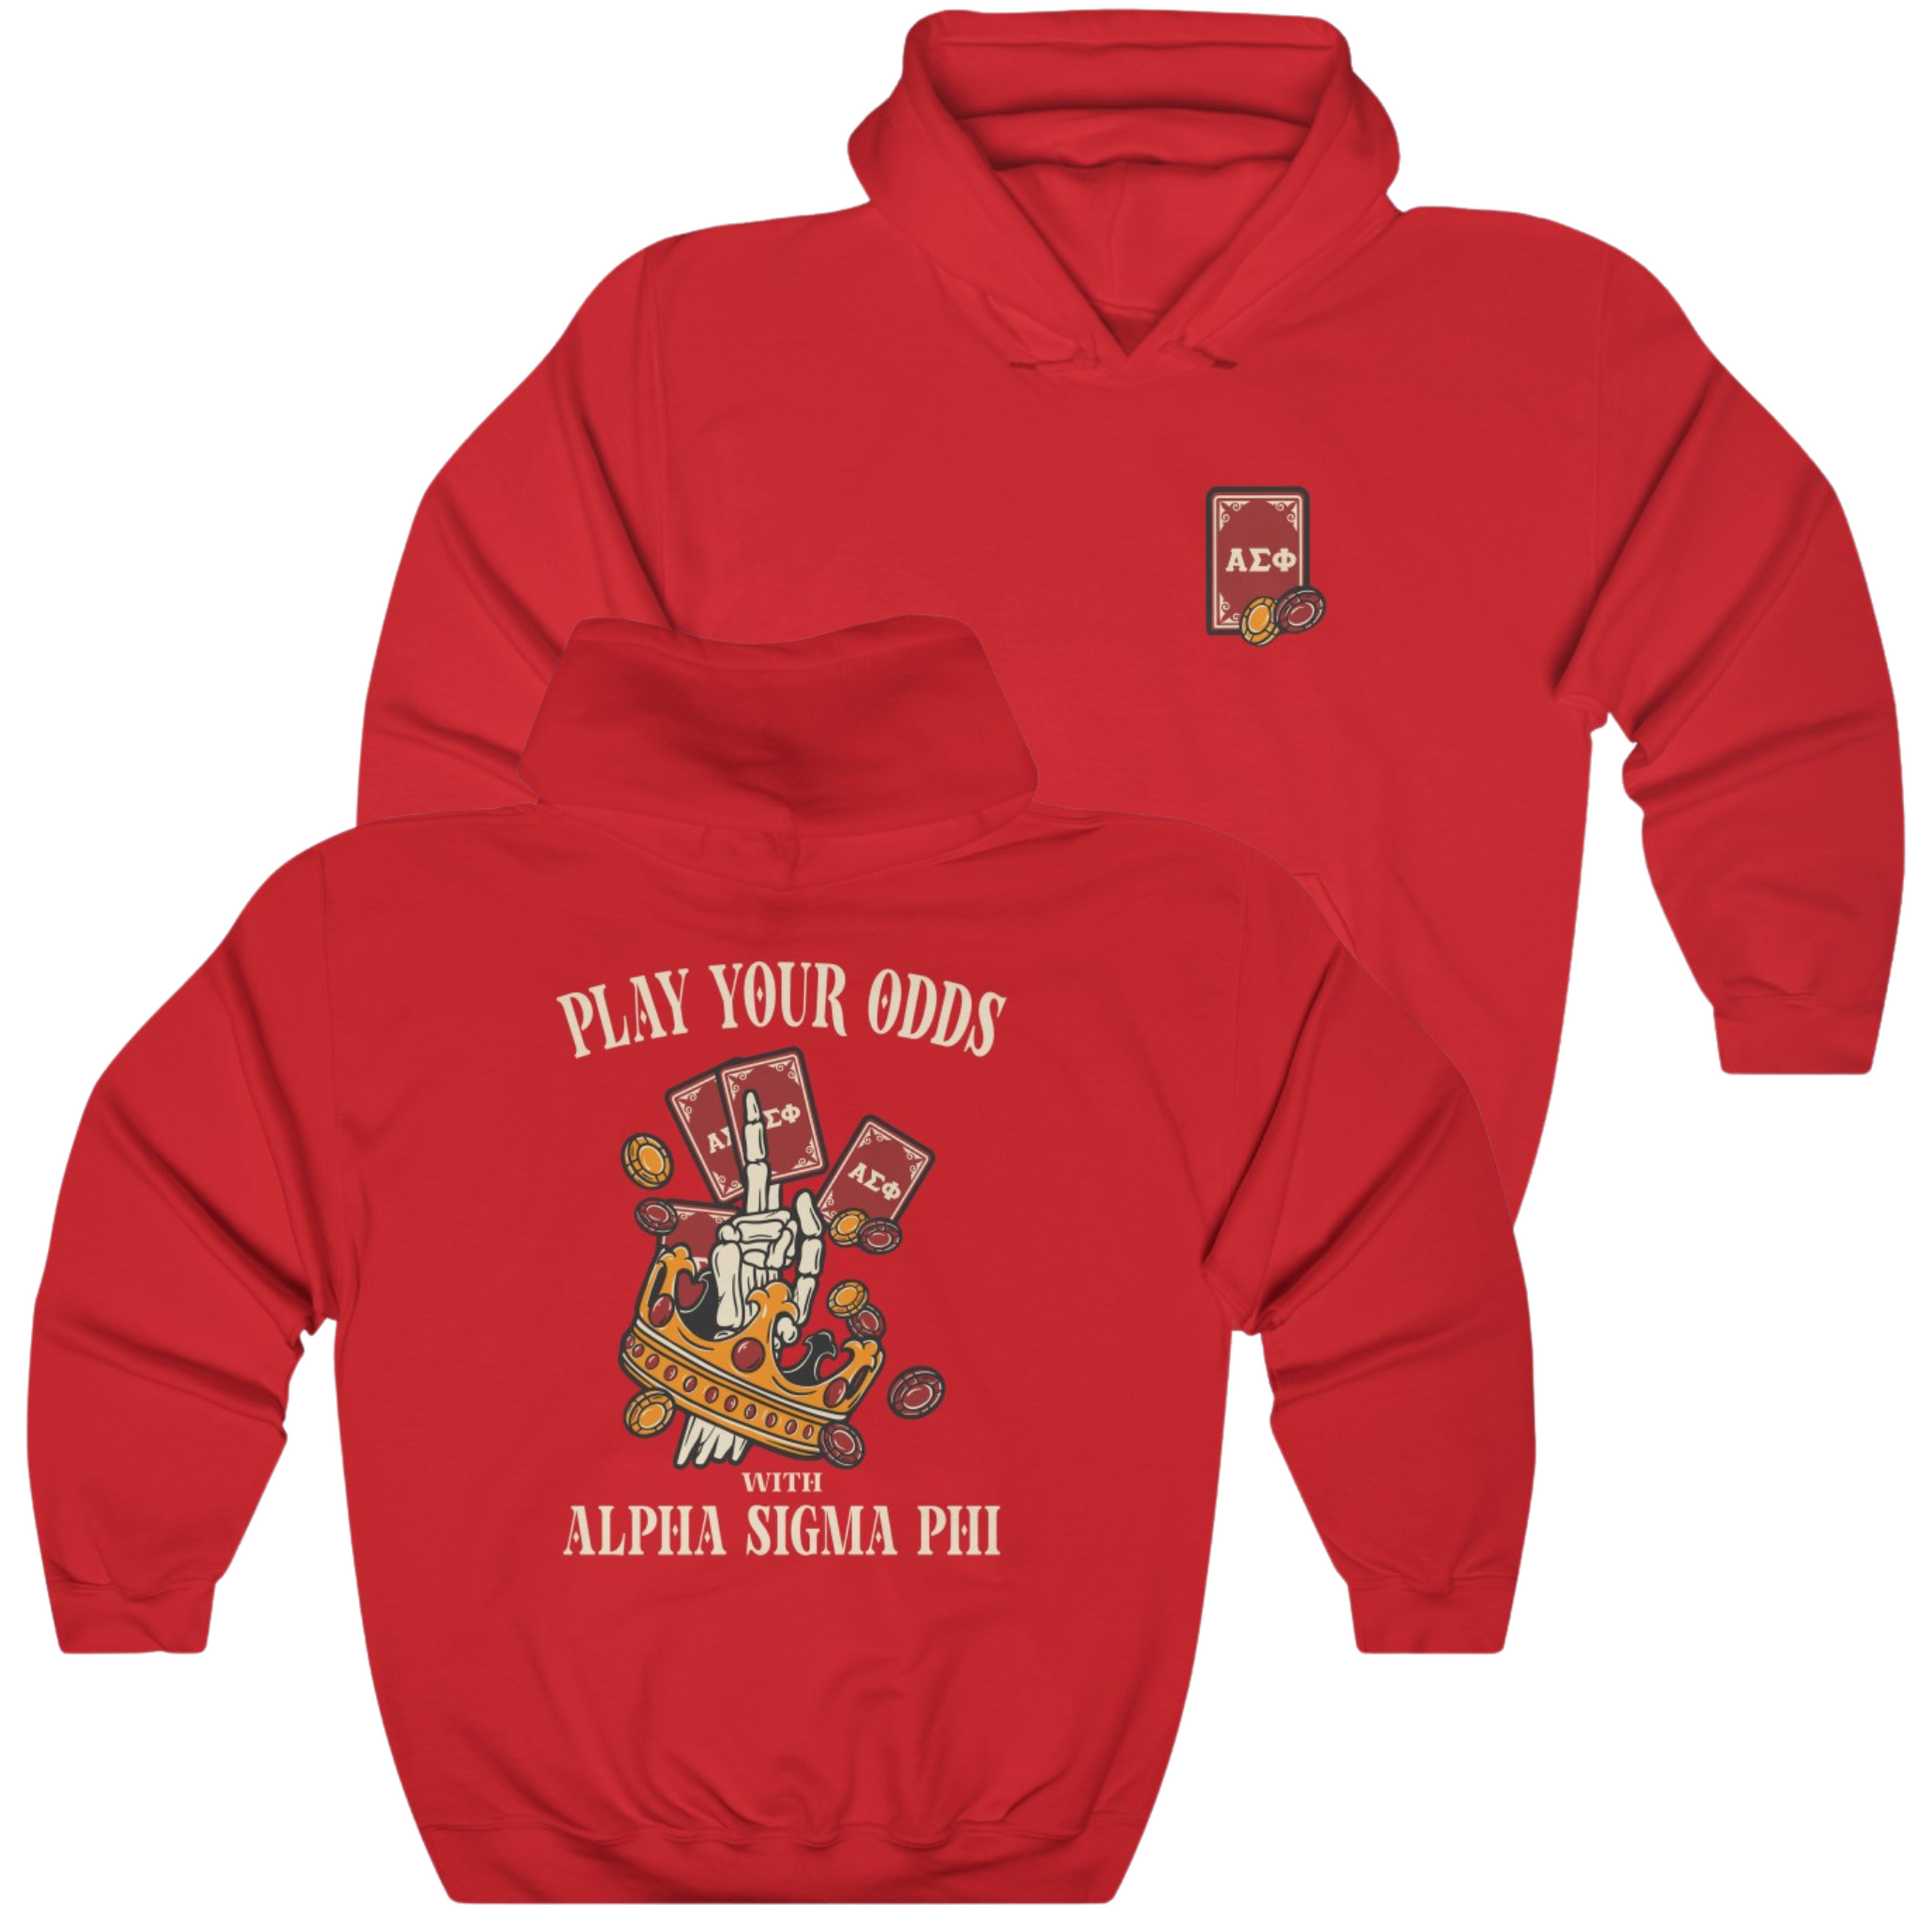 Red Alpha Sigma Phi Graphic Hoodie | Play Your Odds | Alpha Sigma Phi Fraternity Hoodie 